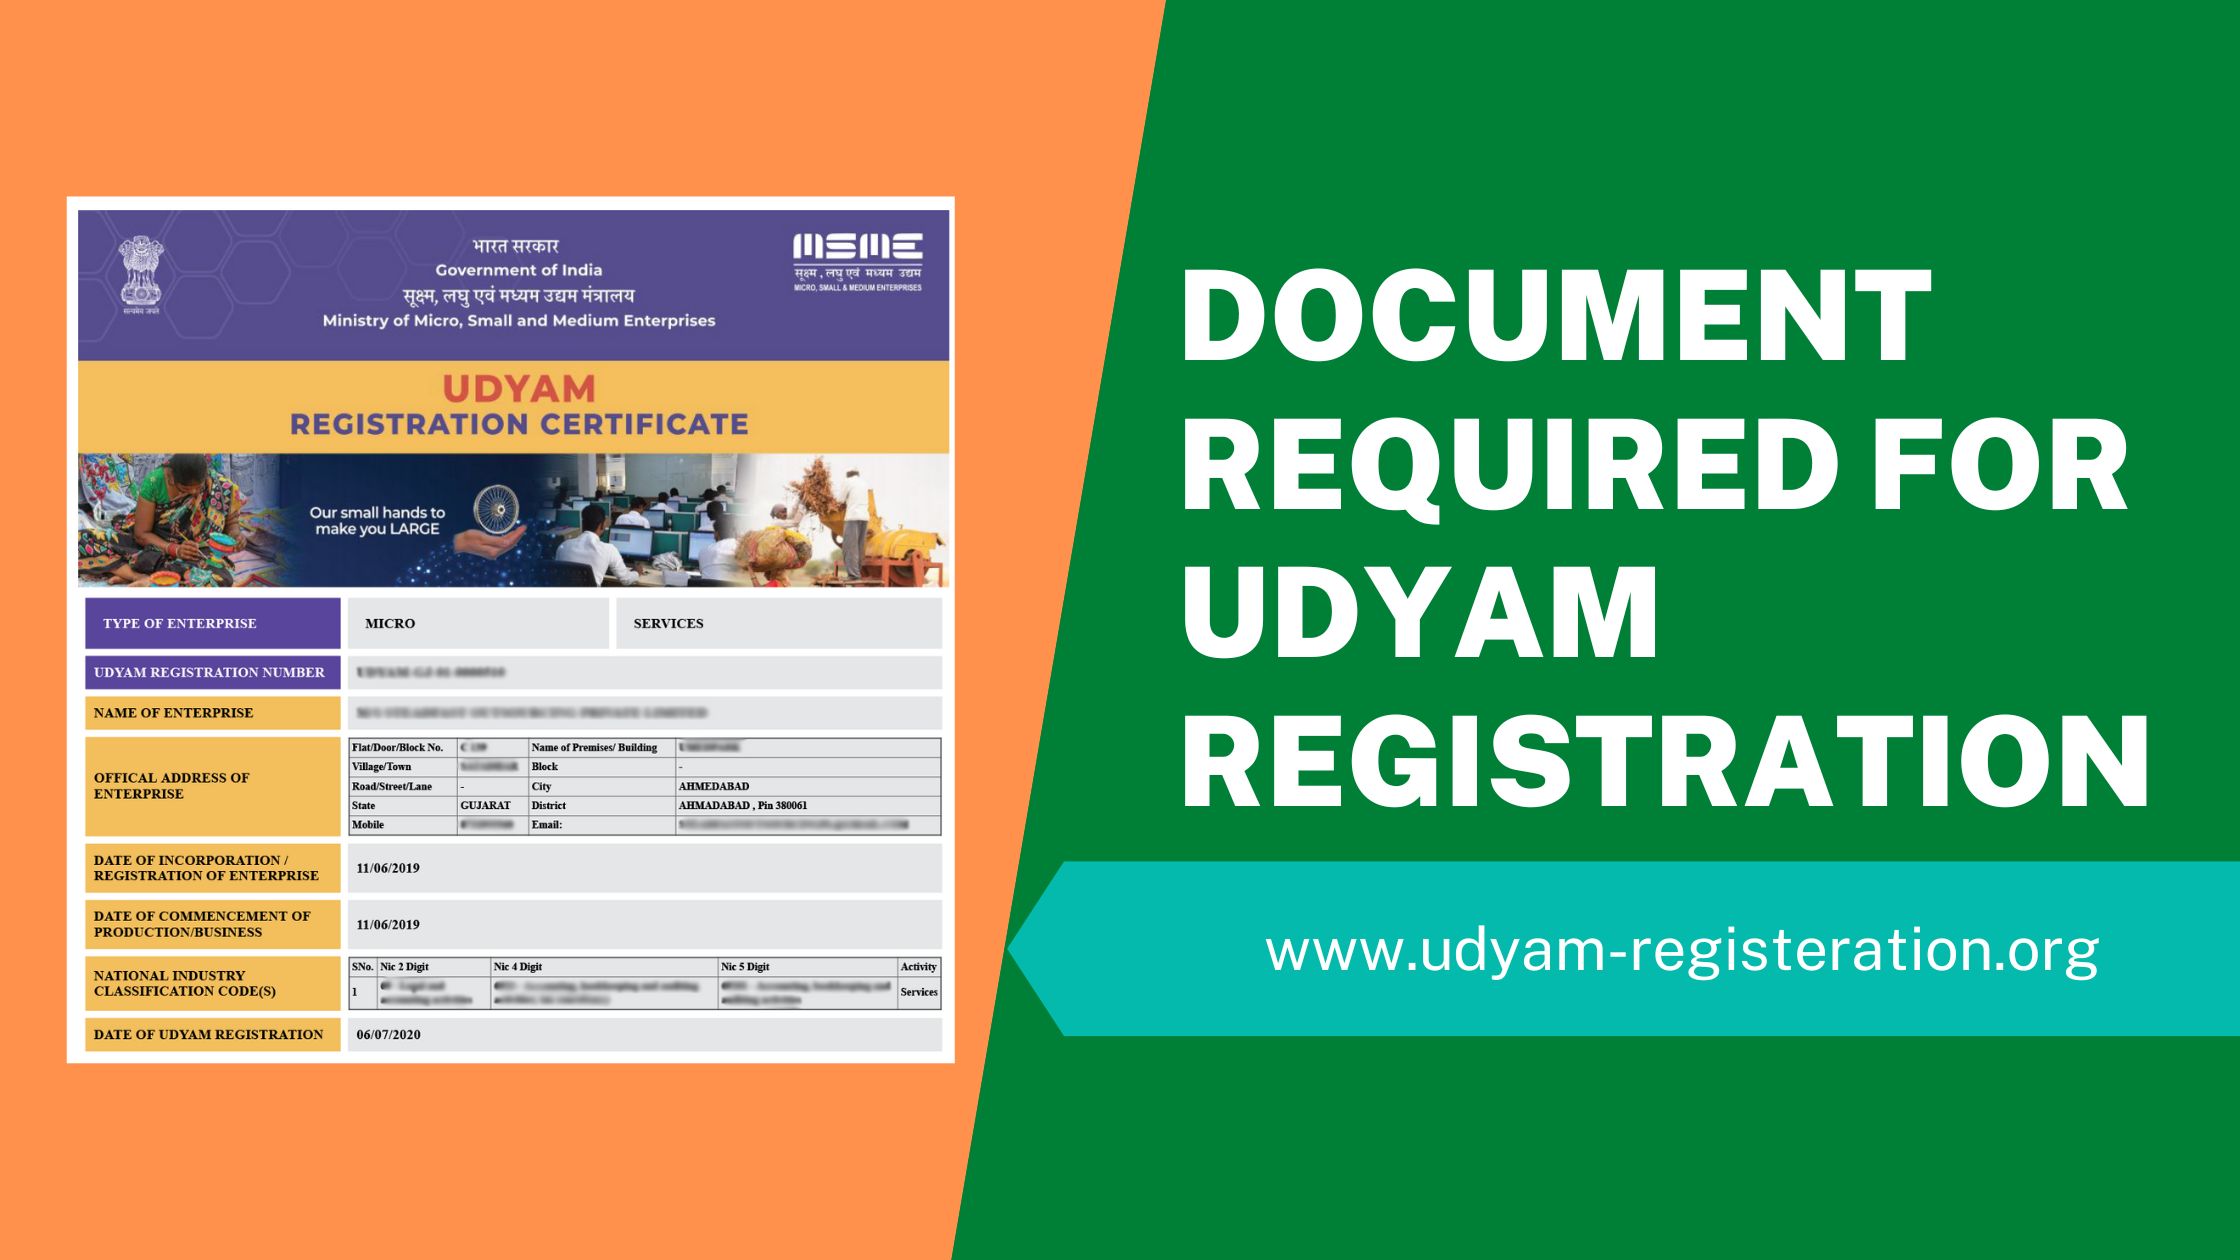 Document Required for Udyam Registration